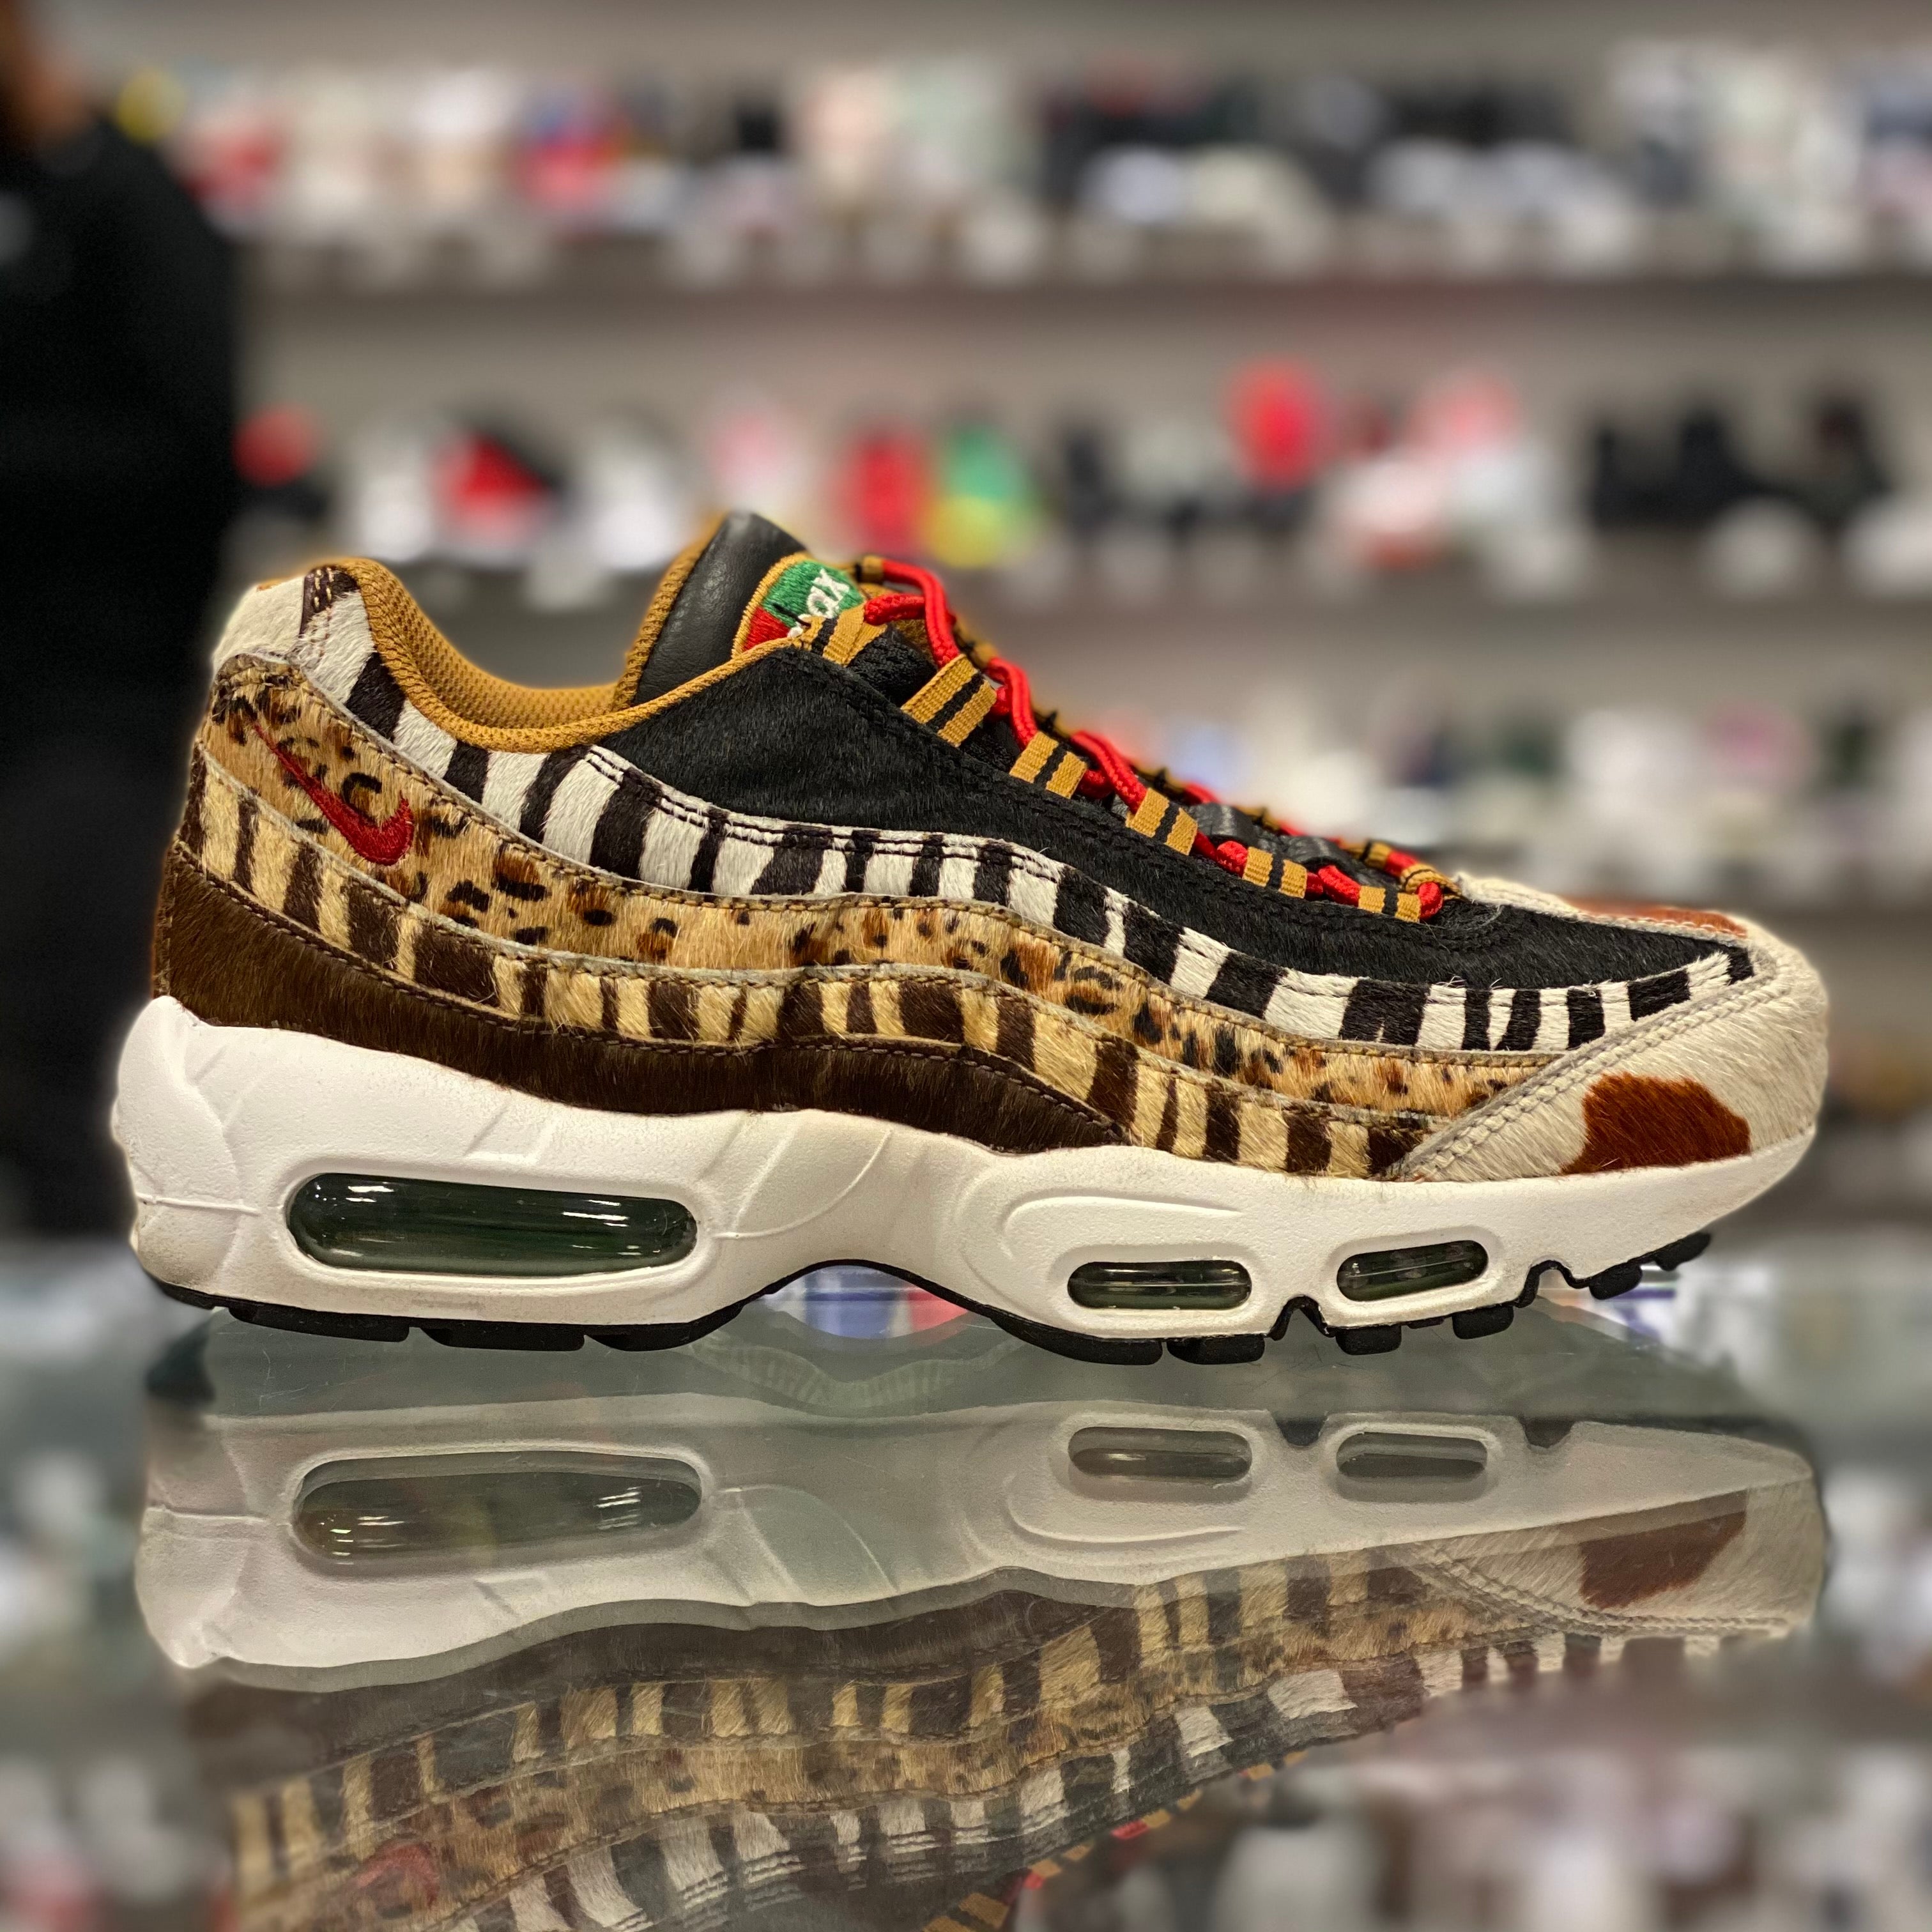 Nike Air Max 95 “Atmos Animal Pack 2.0” | Request